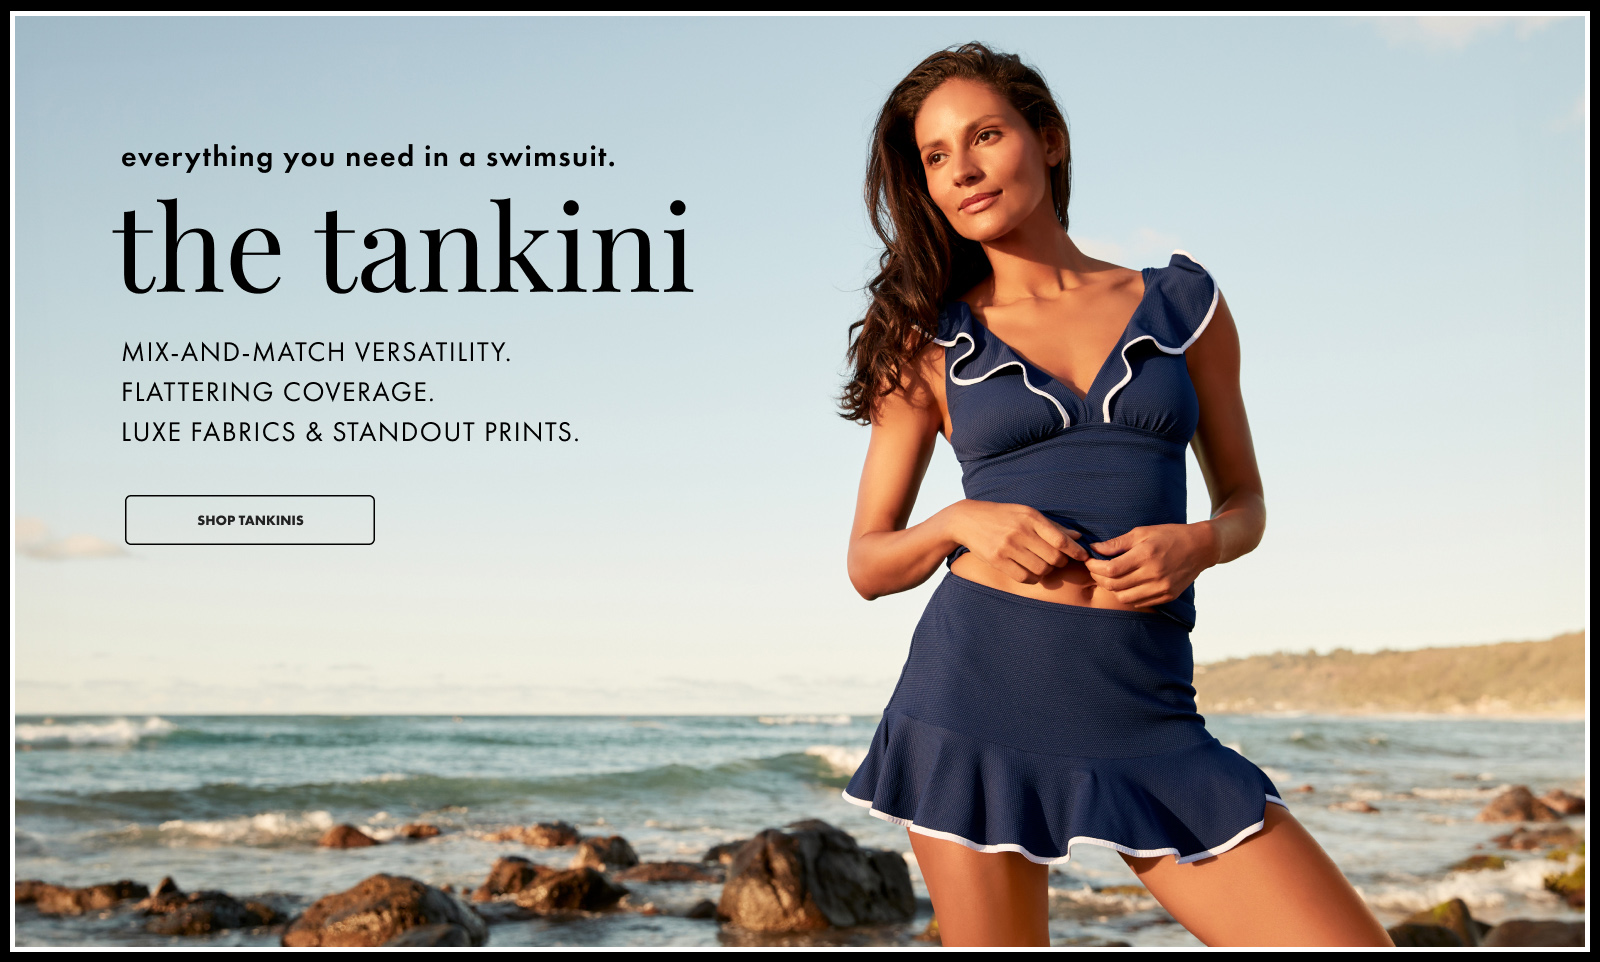 Everything you need in a swimsuit. The tankini.